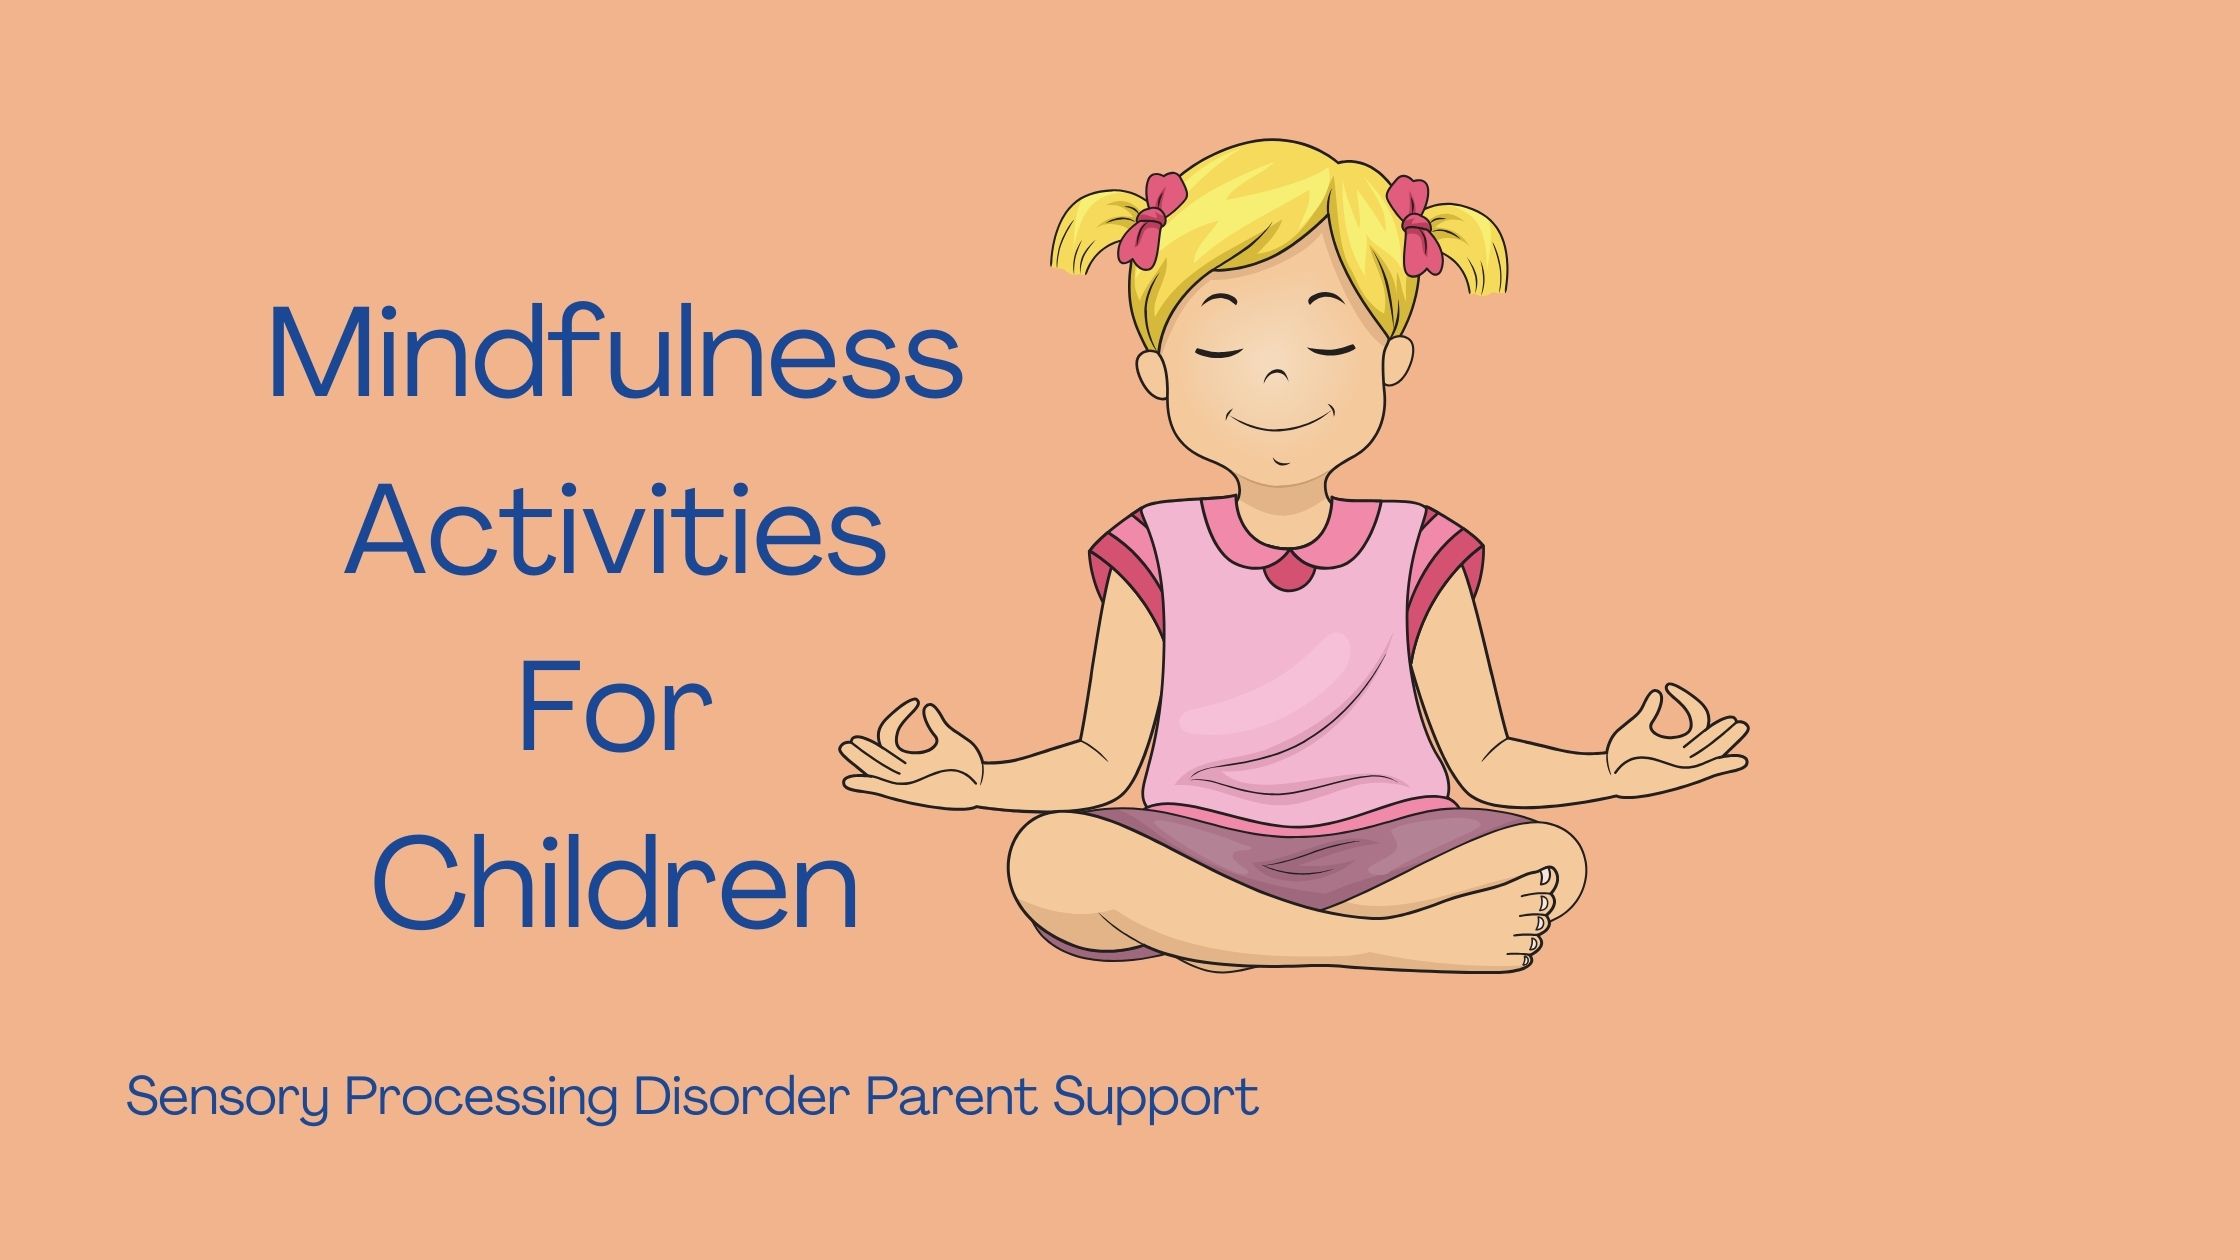 girl with sensory processing disorder being mindful Mindfulness Activities For Children